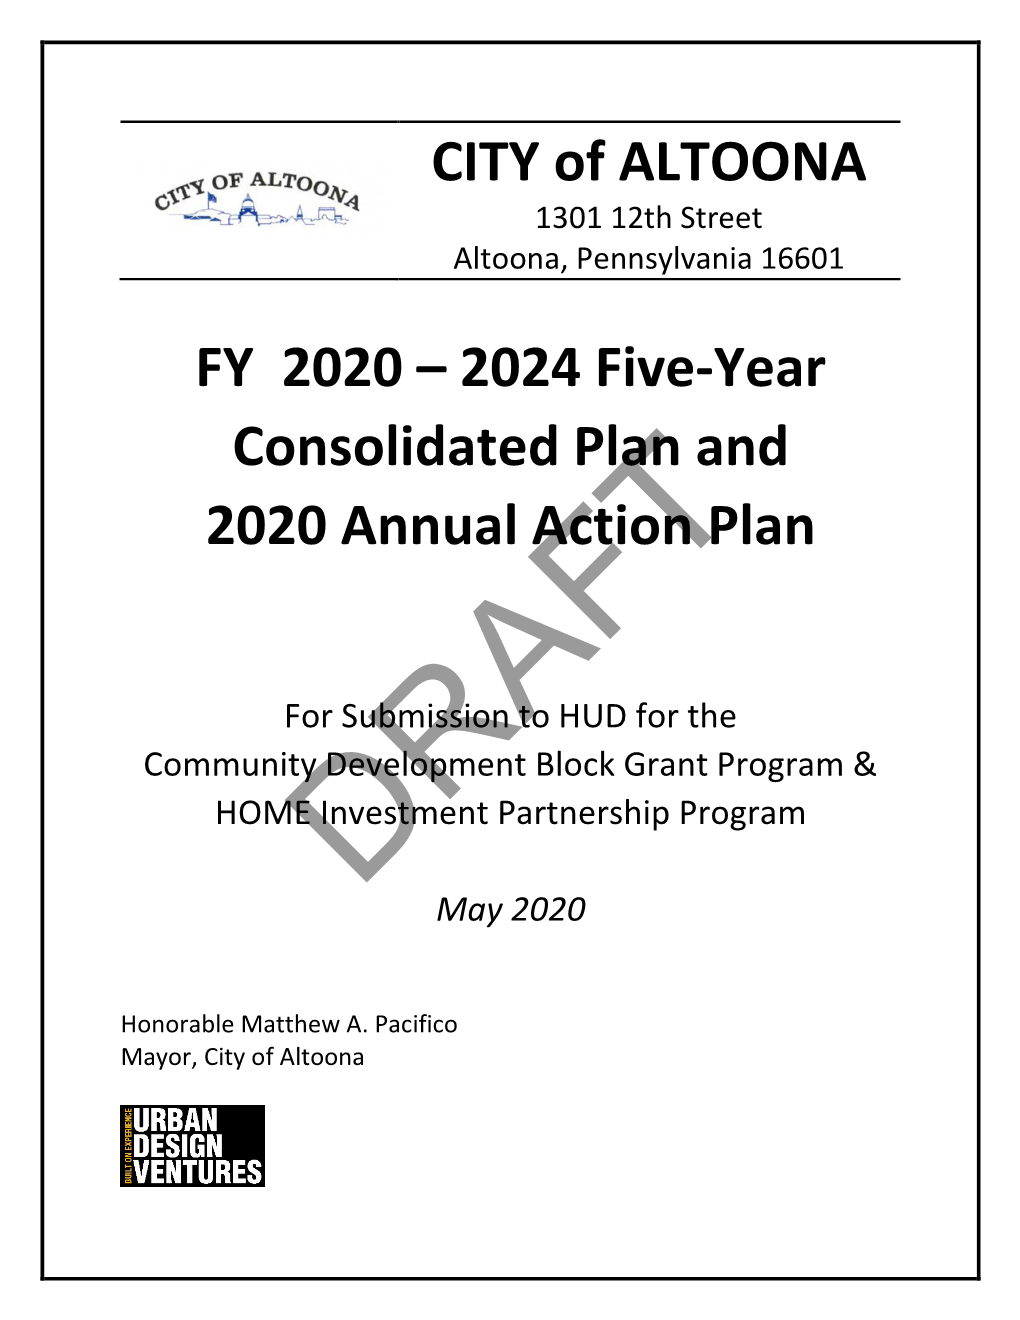 CITY of ALTOONA FY 2020 – 2024 Five-Year Consolidated Plan And